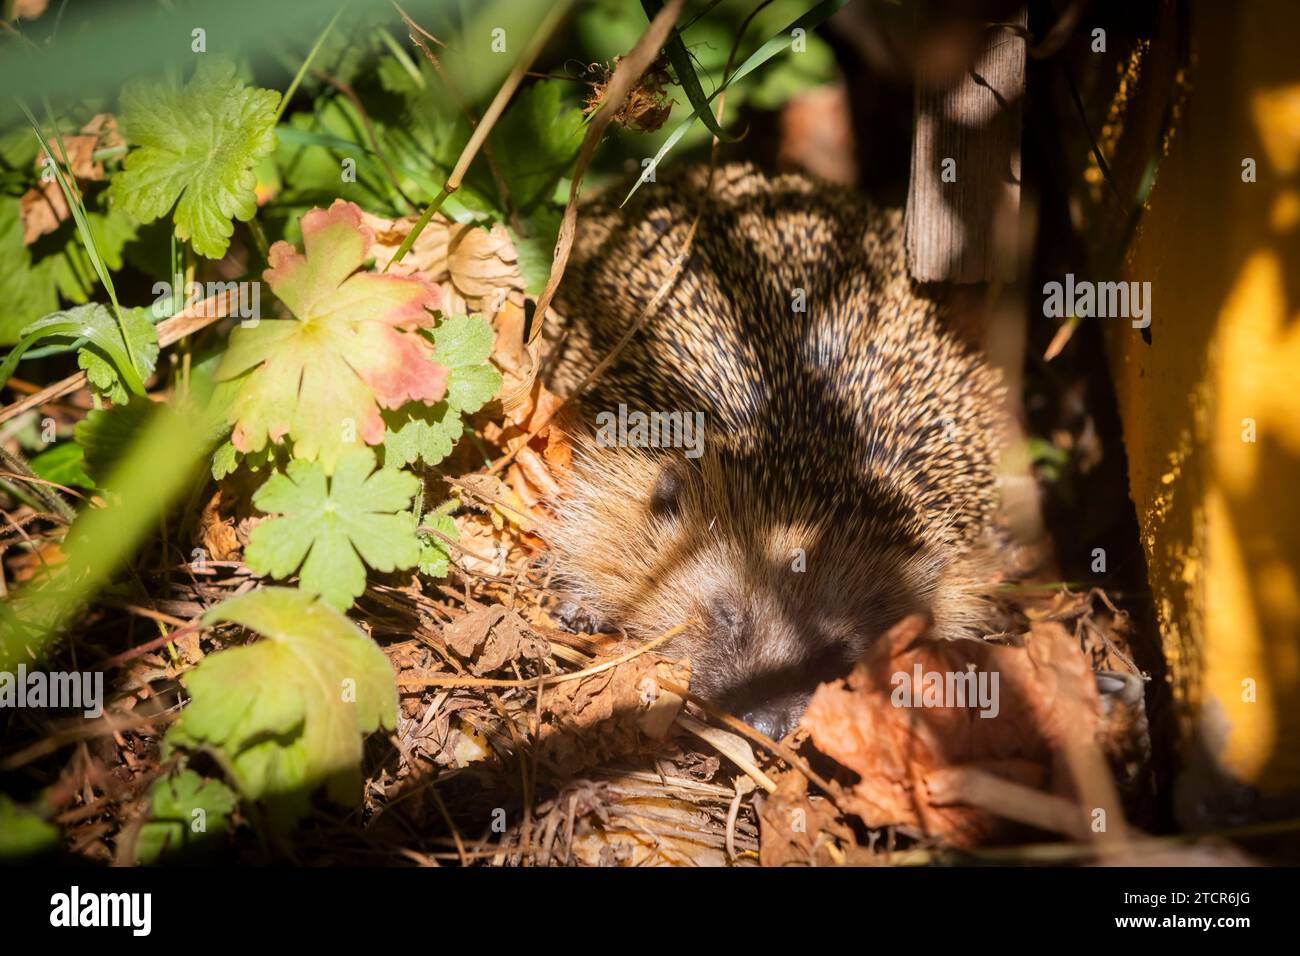 Hedgehog mother with young in the living environment of humans. A near-natural garden is a good habitat for hedgehogs, young hedgehogs can also be Stock Photo